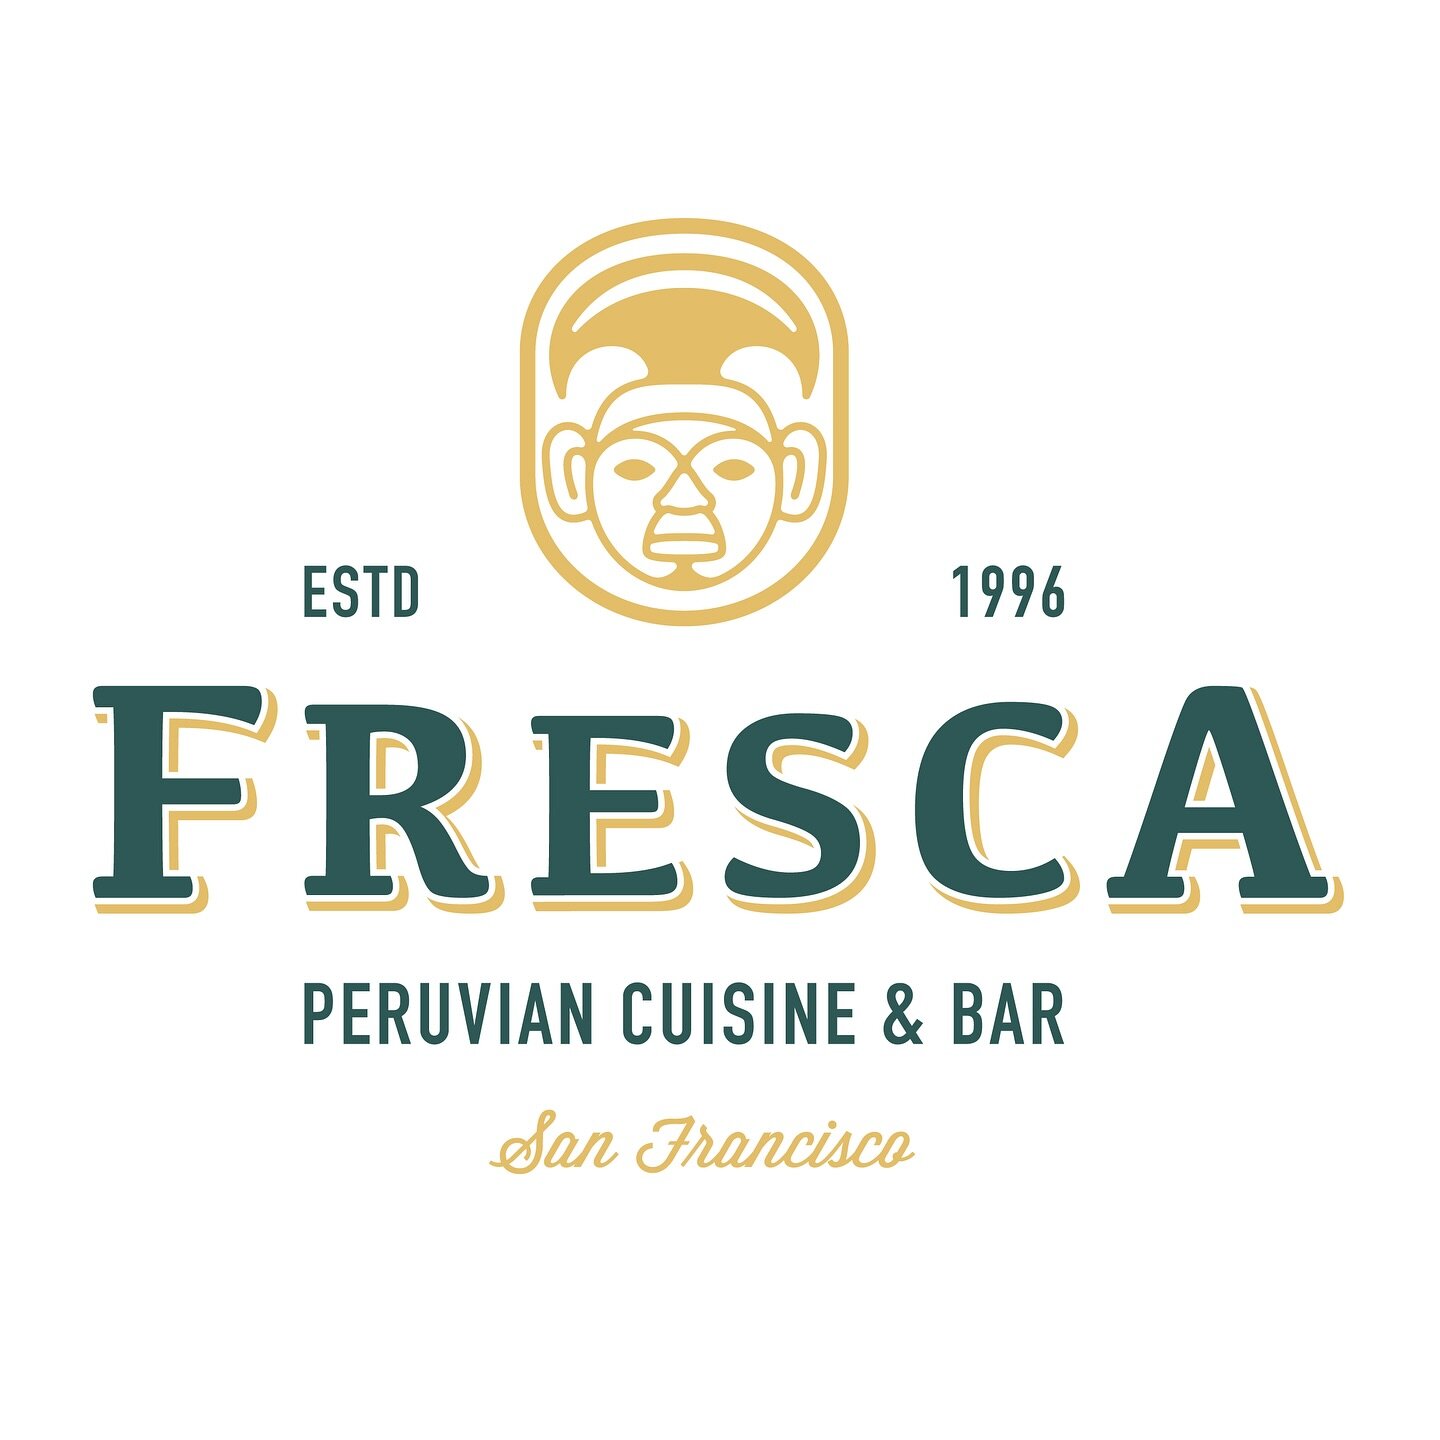 Happy New Year, everyone! ✨ As we step into 2024, we&rsquo;re excited for our remodeled location in Noe Valley to reopen its doors to all our amazing guests and Fresca family 🤩 Stay tuned, we will be posting updates as they happen🎊

We&rsquo;ve upd